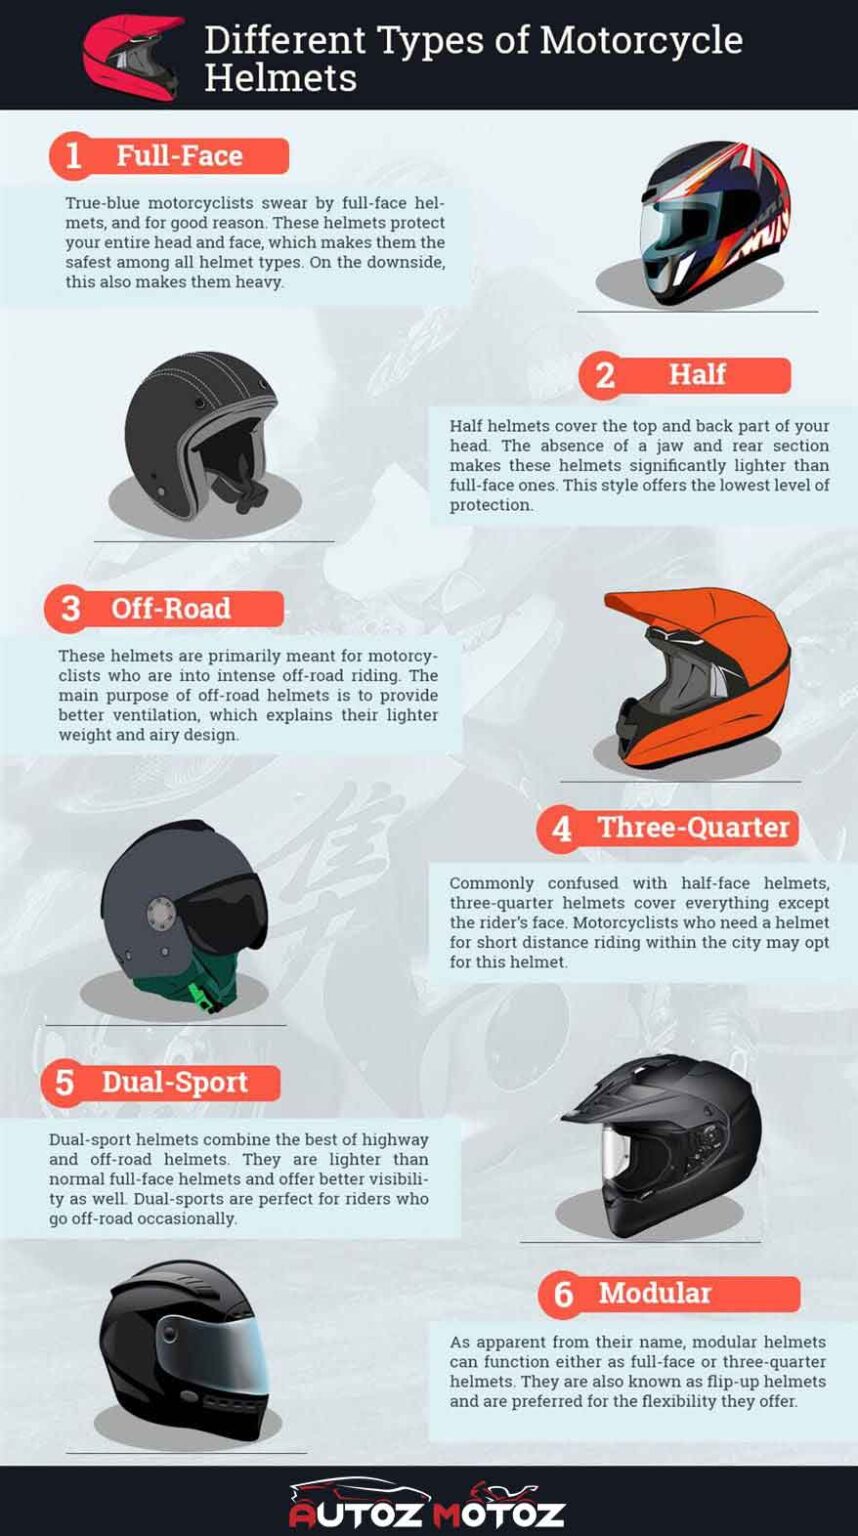 Different Types of Motorcycle Helmets with PROS and CONS - AutozMotoz